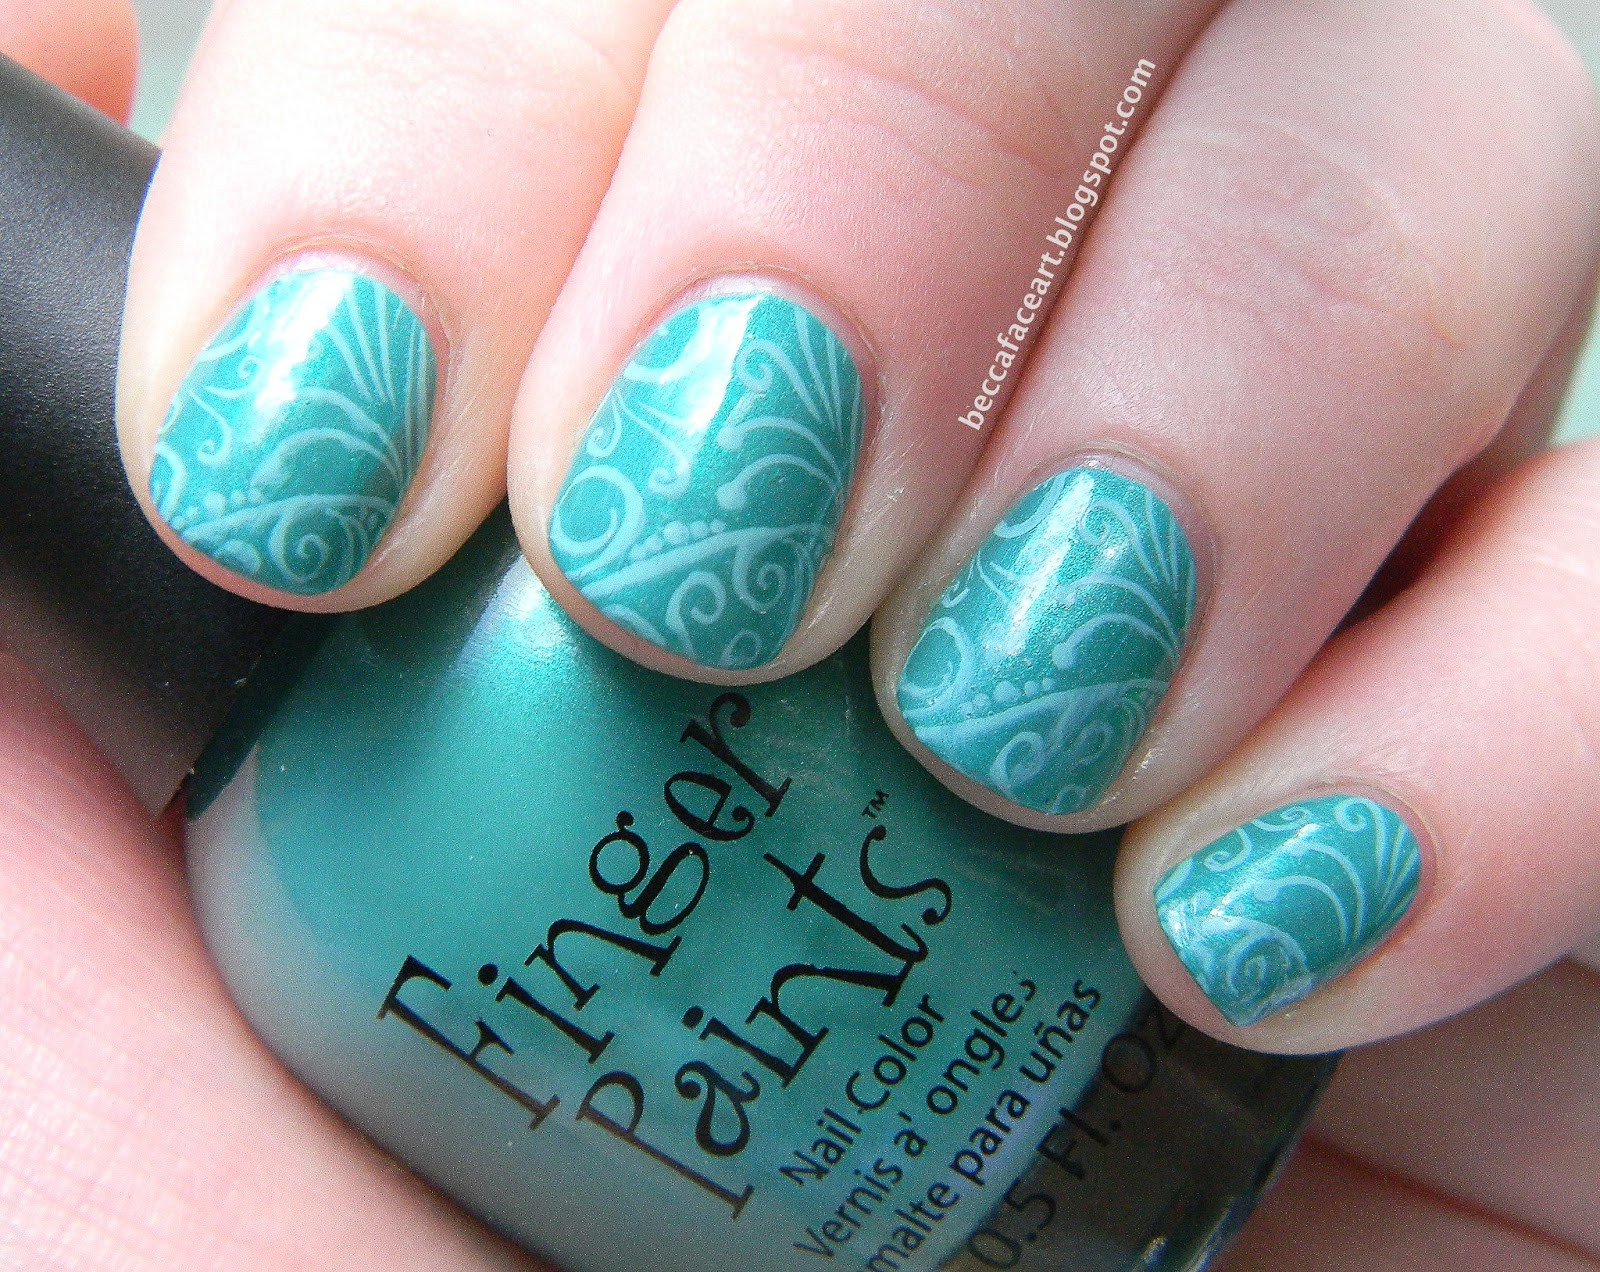 Turquoise Nail Designs
 Becca Face Nail Art Turquoise and Teal Swirl Nails